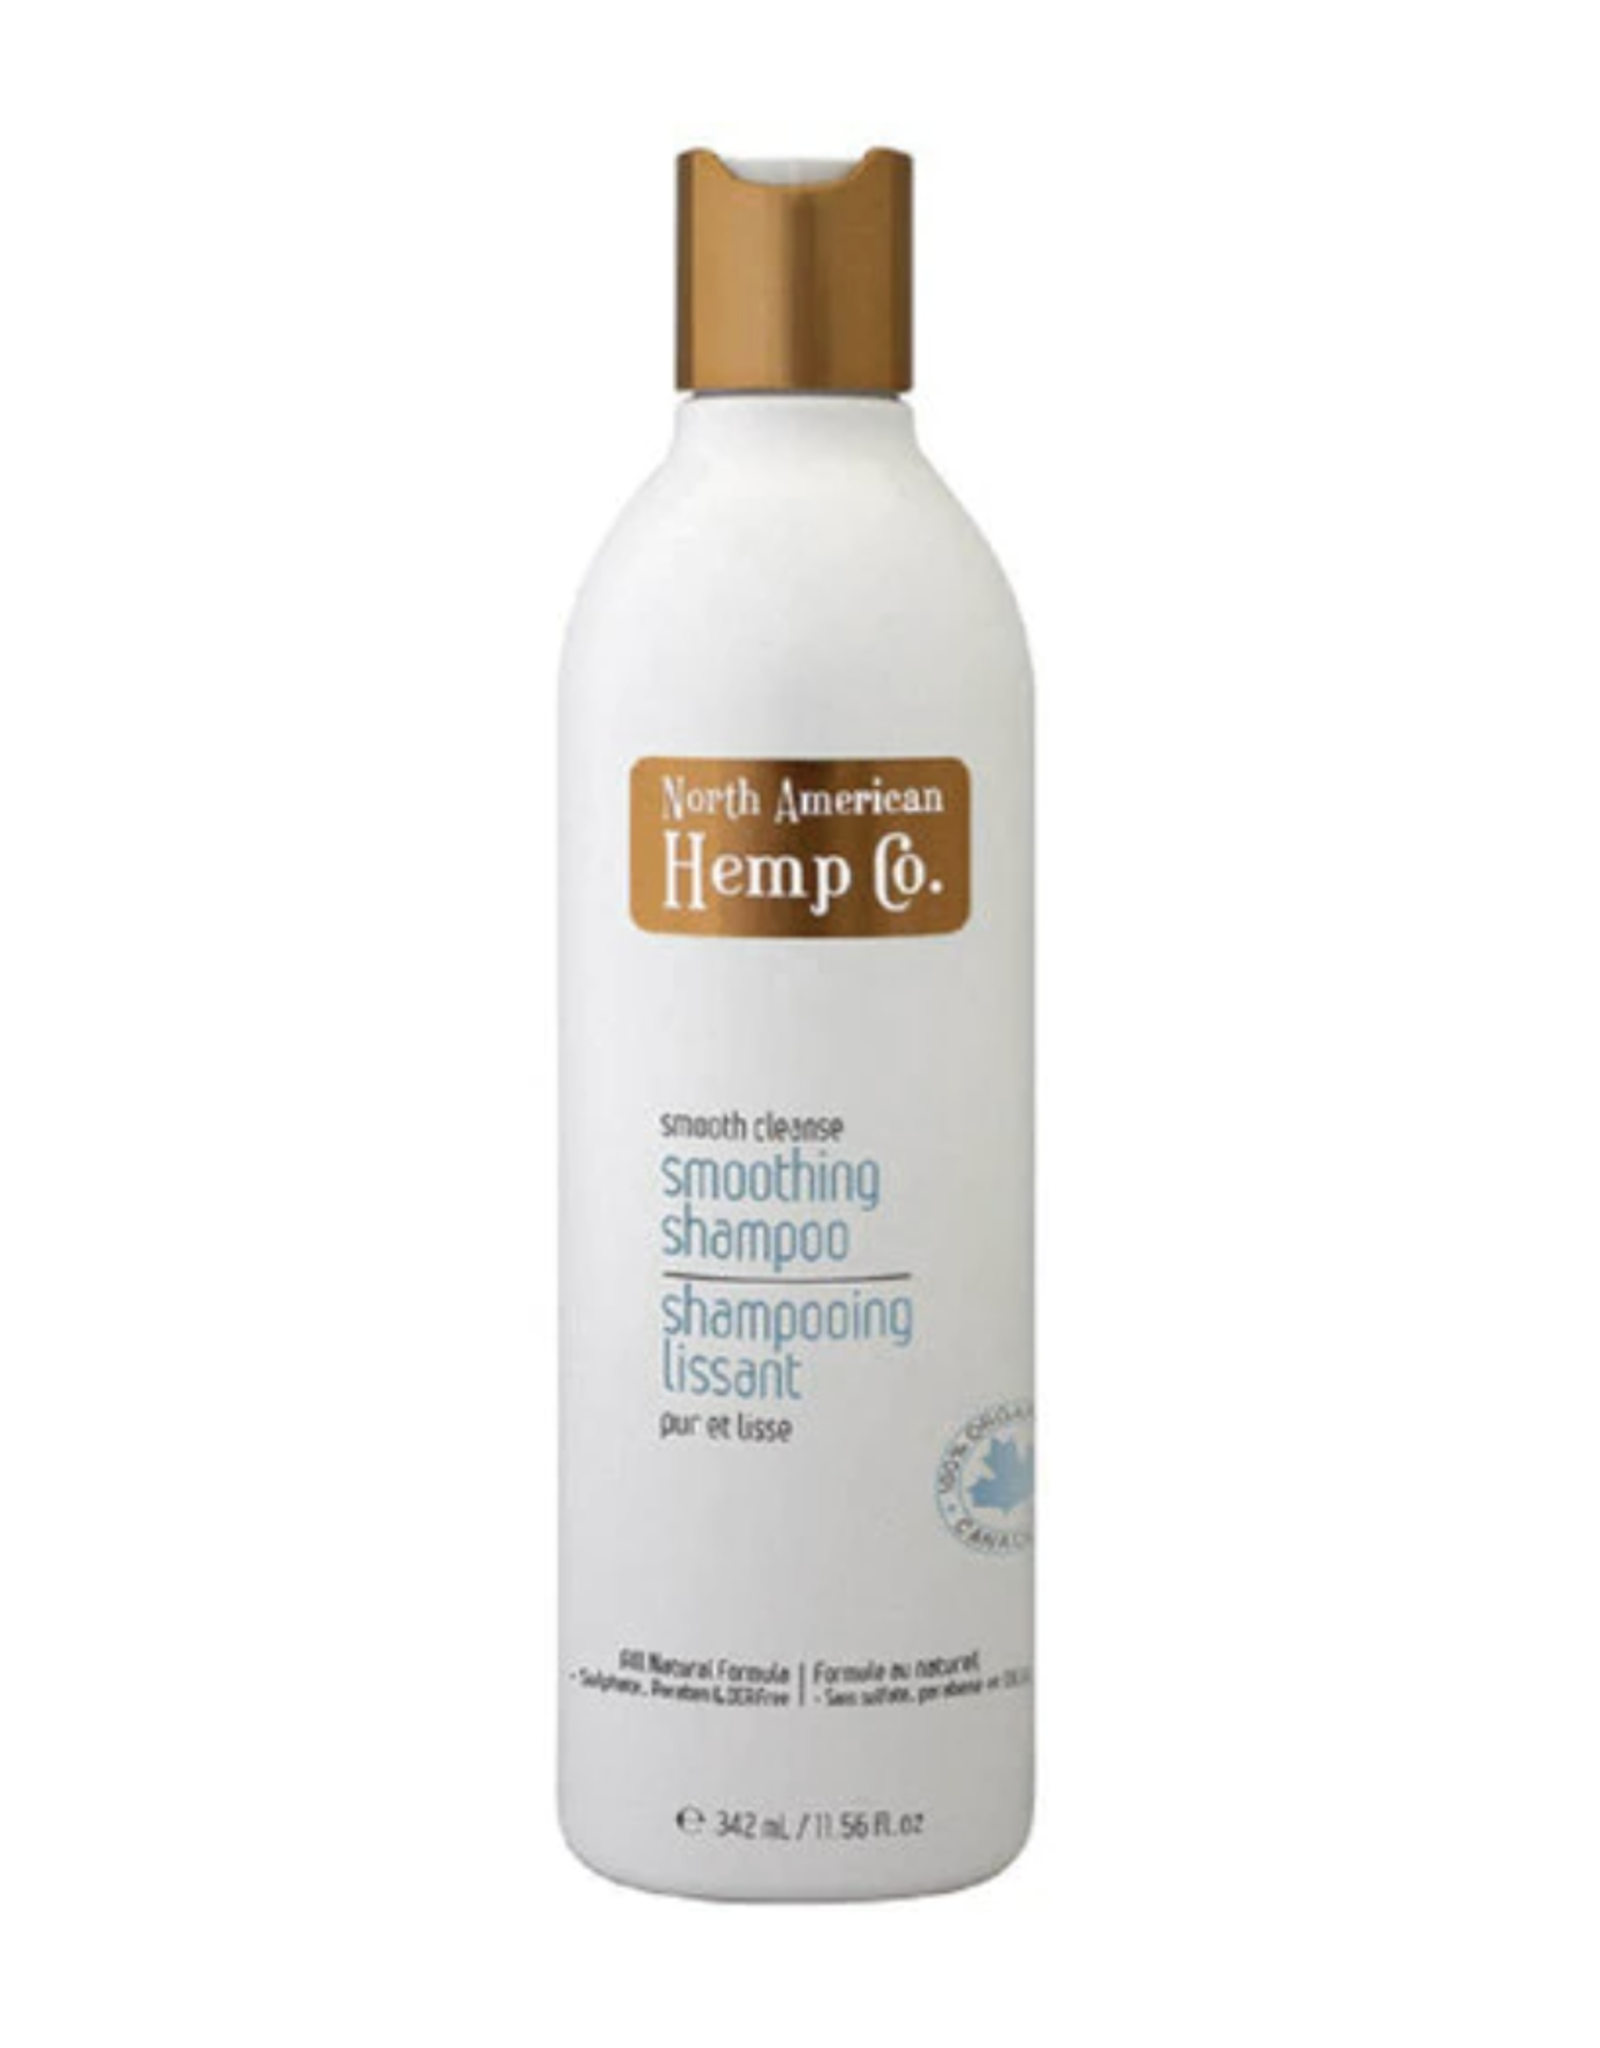 Smooth Cleanse Smoothing Shampoo by North American Hemp Co. 342ml